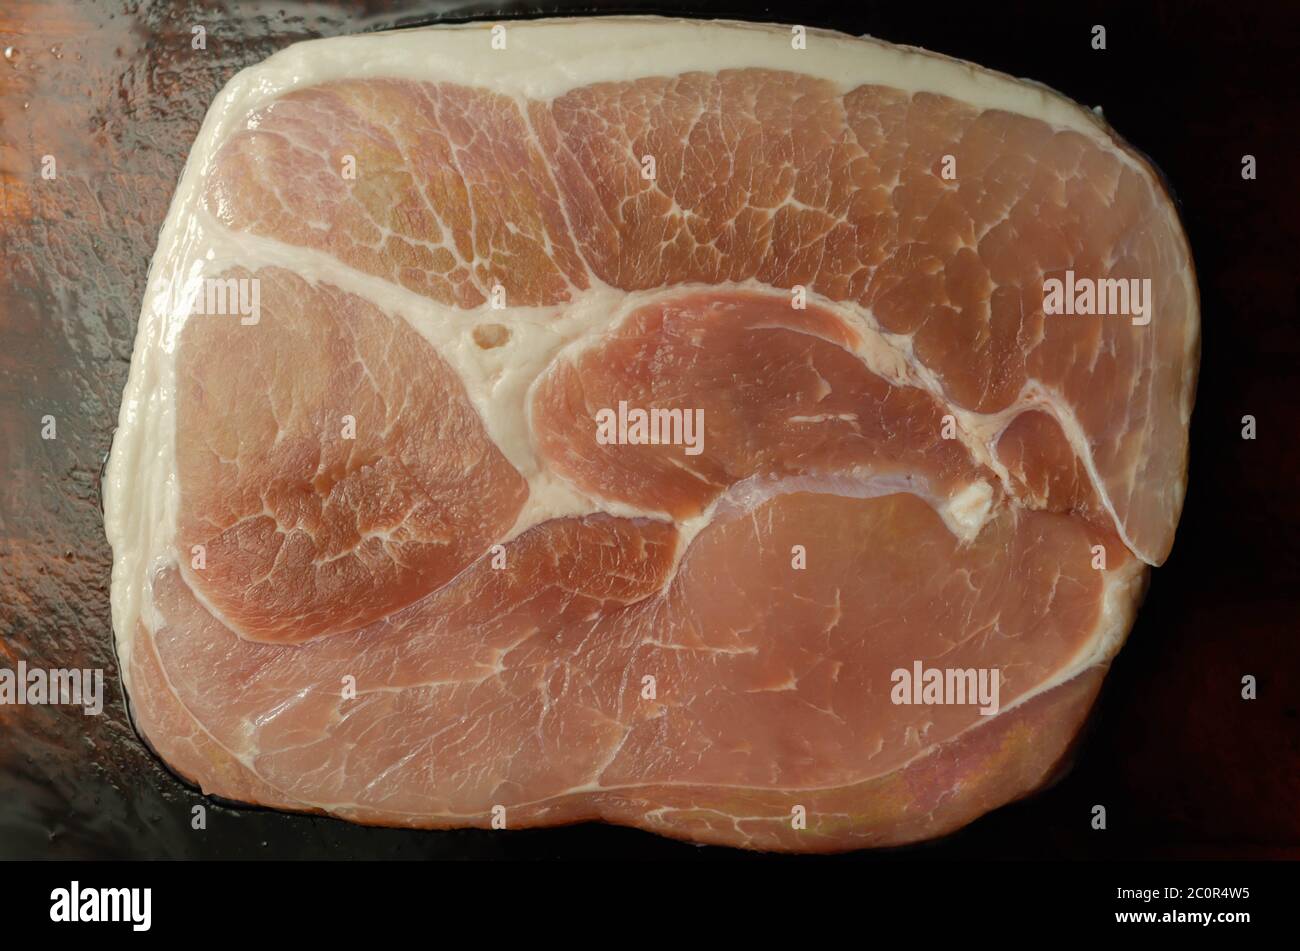 Formed ham is made up of many meat cuts